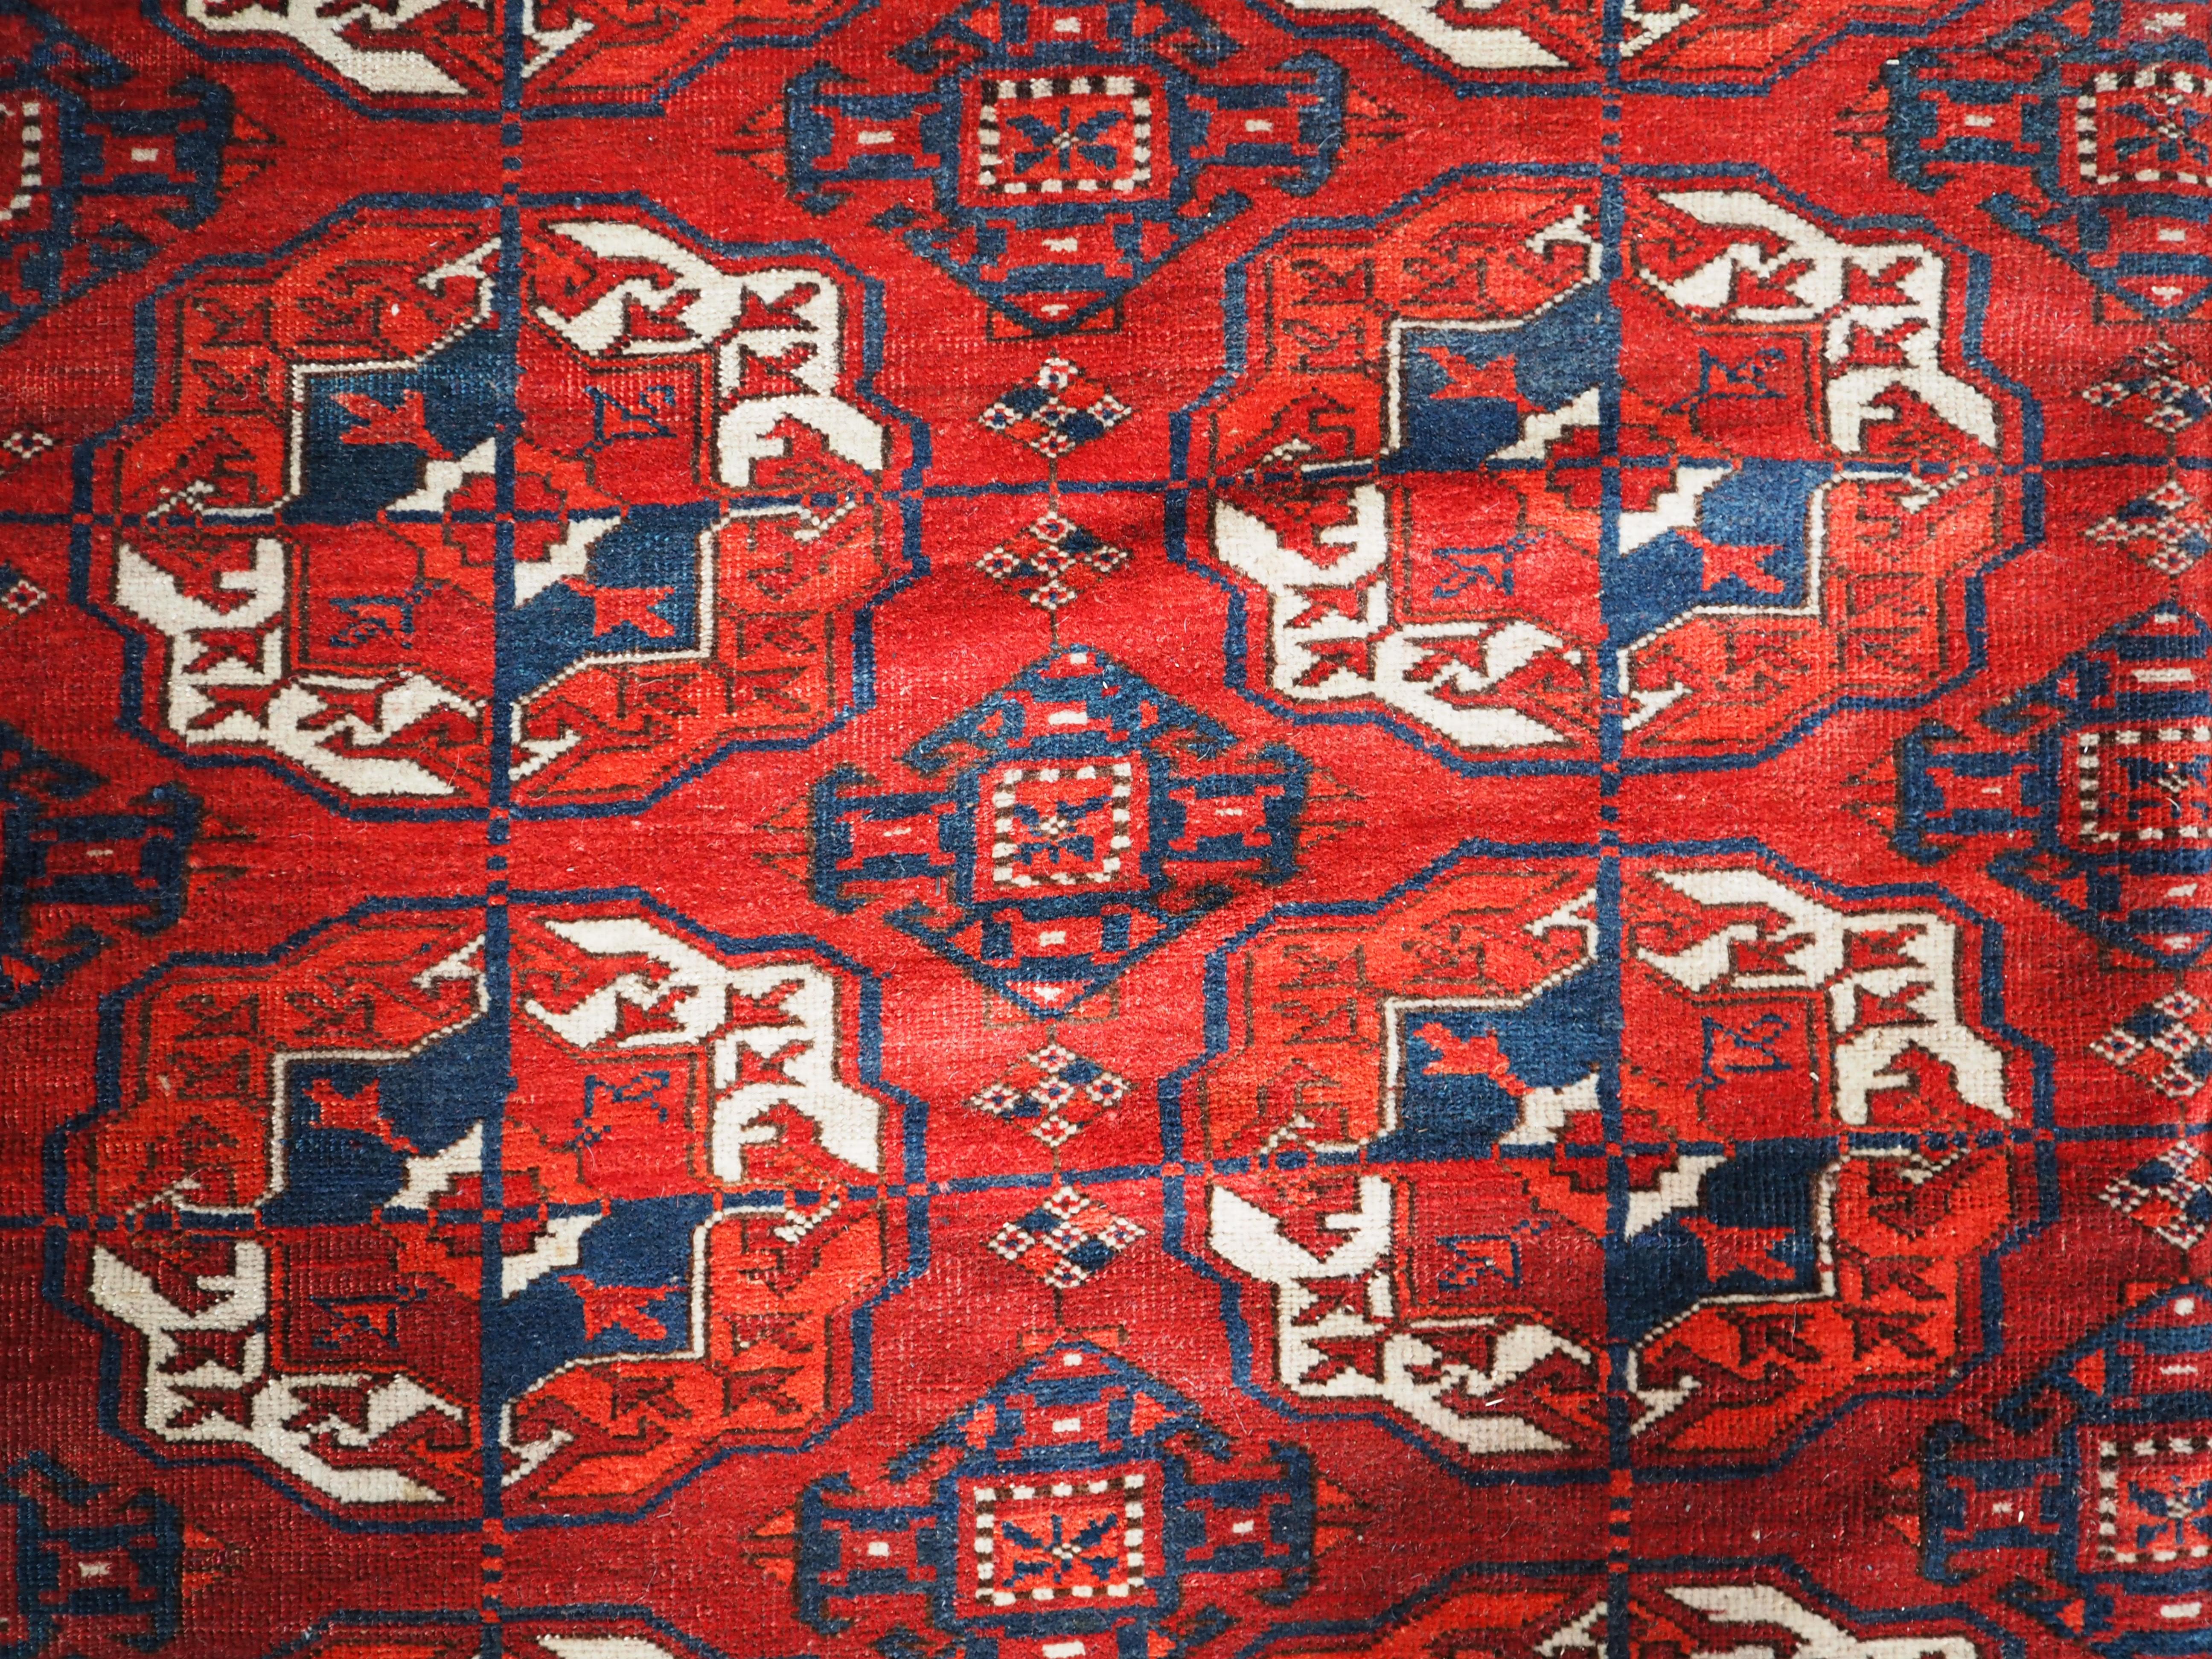 Hand-Woven Antique Tekke Turkmen Main Carpet with 4 Rows of 10 Guls For Sale